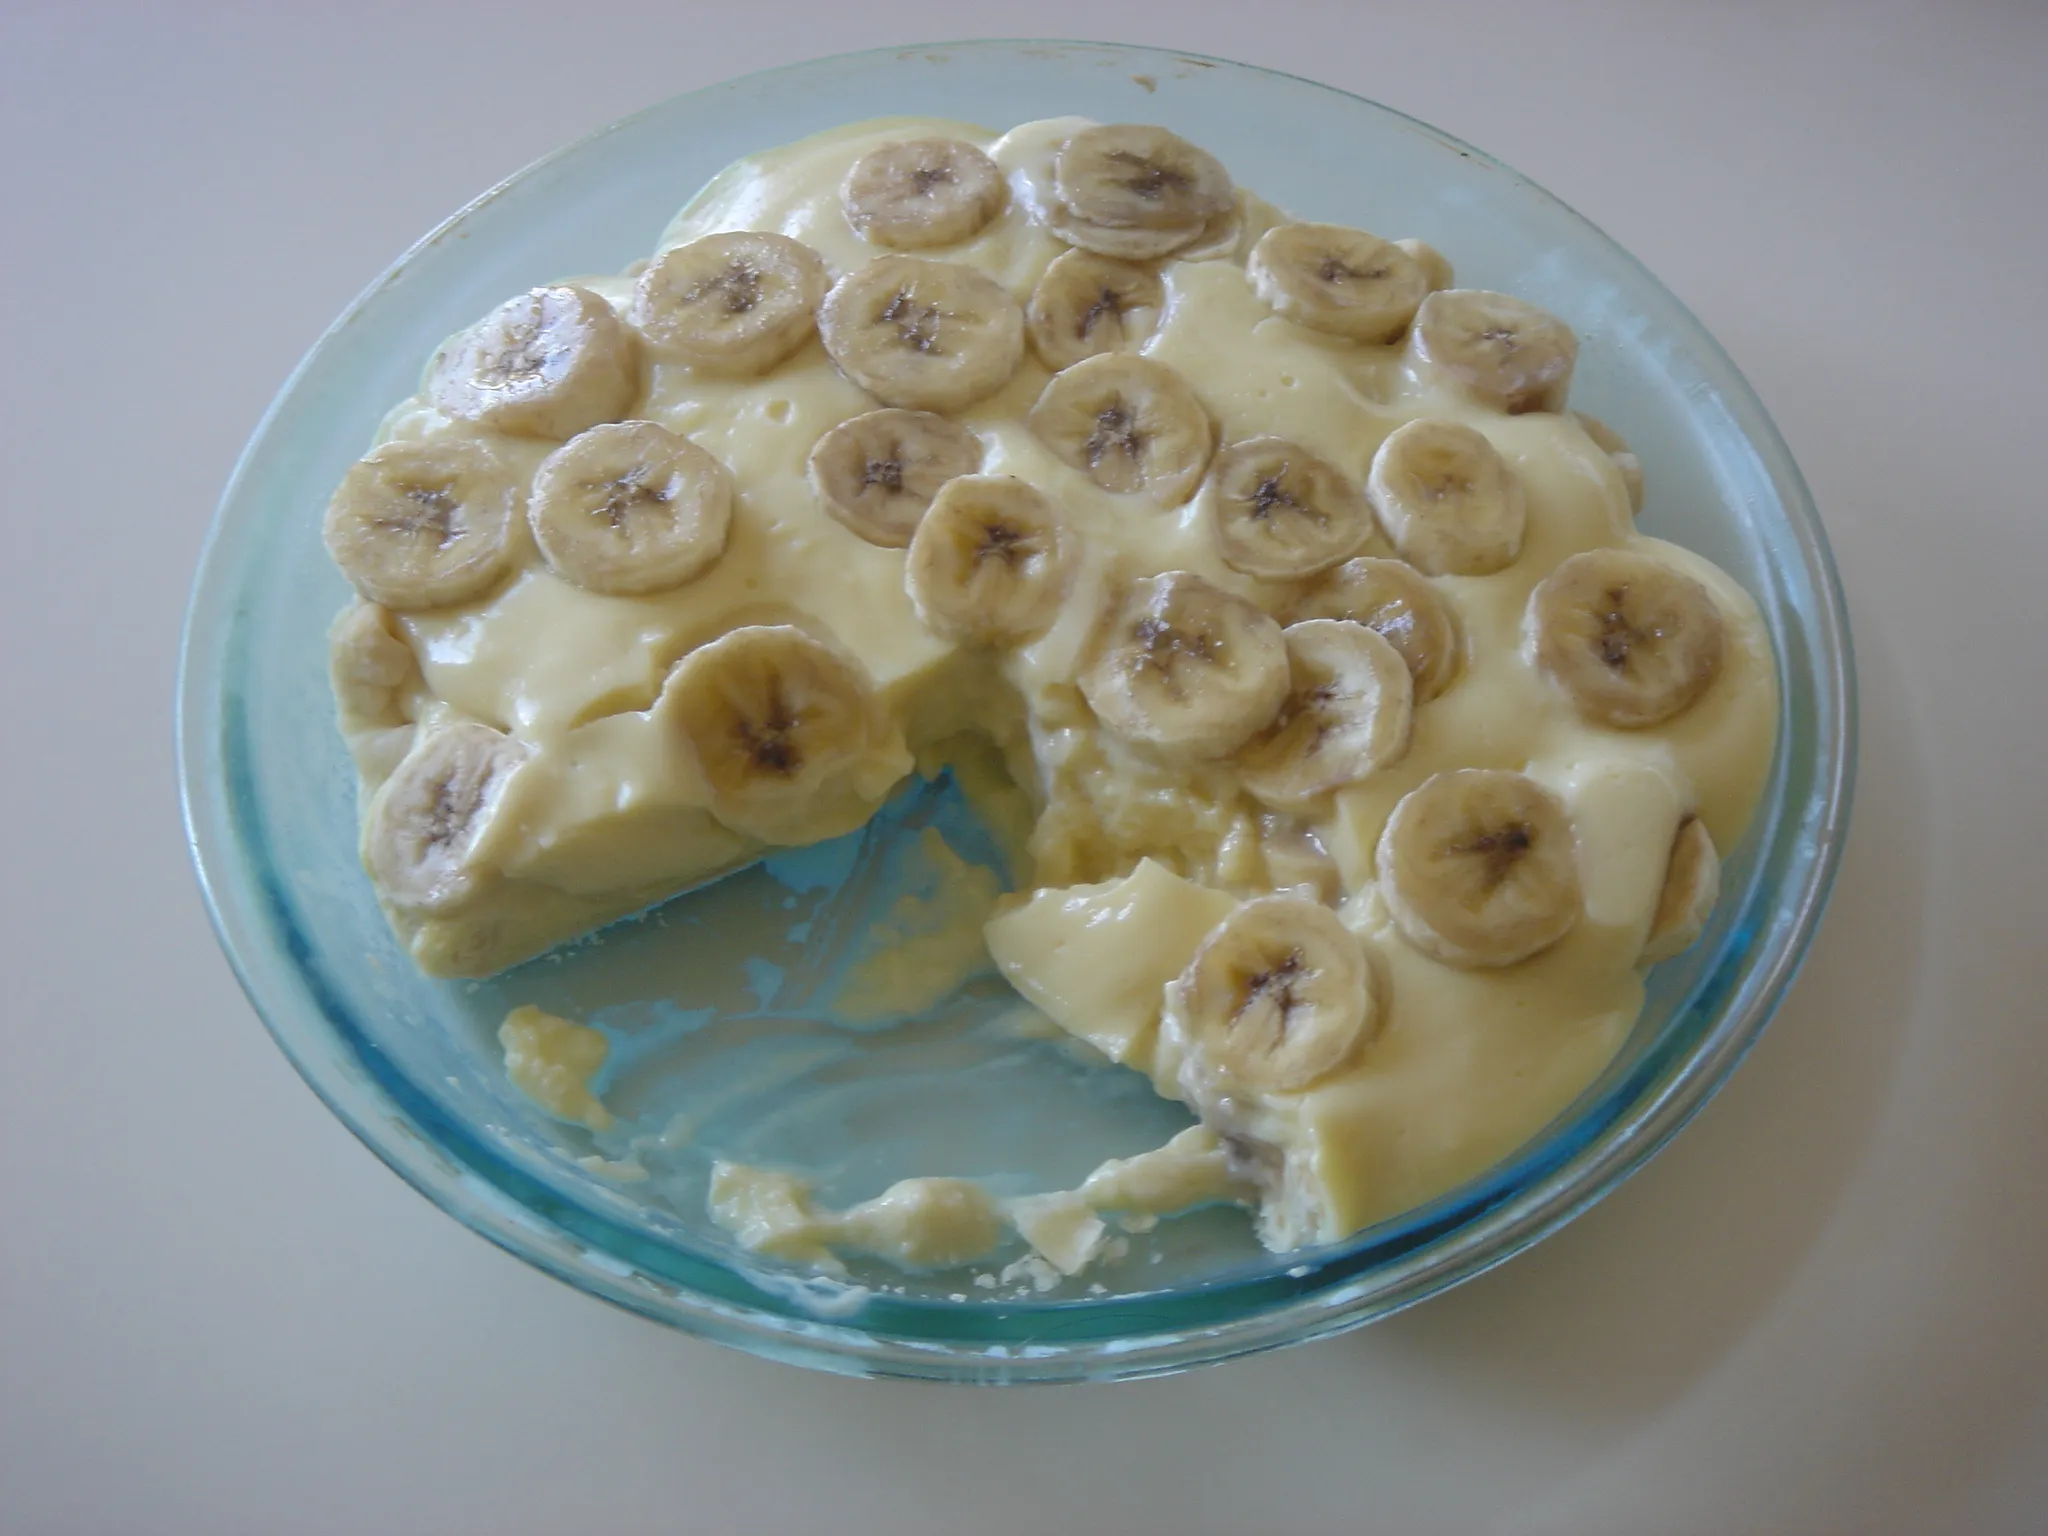 Make Magnolia Bakery’s Famous Banana Pudding at Home: Step-by-Step Recipe